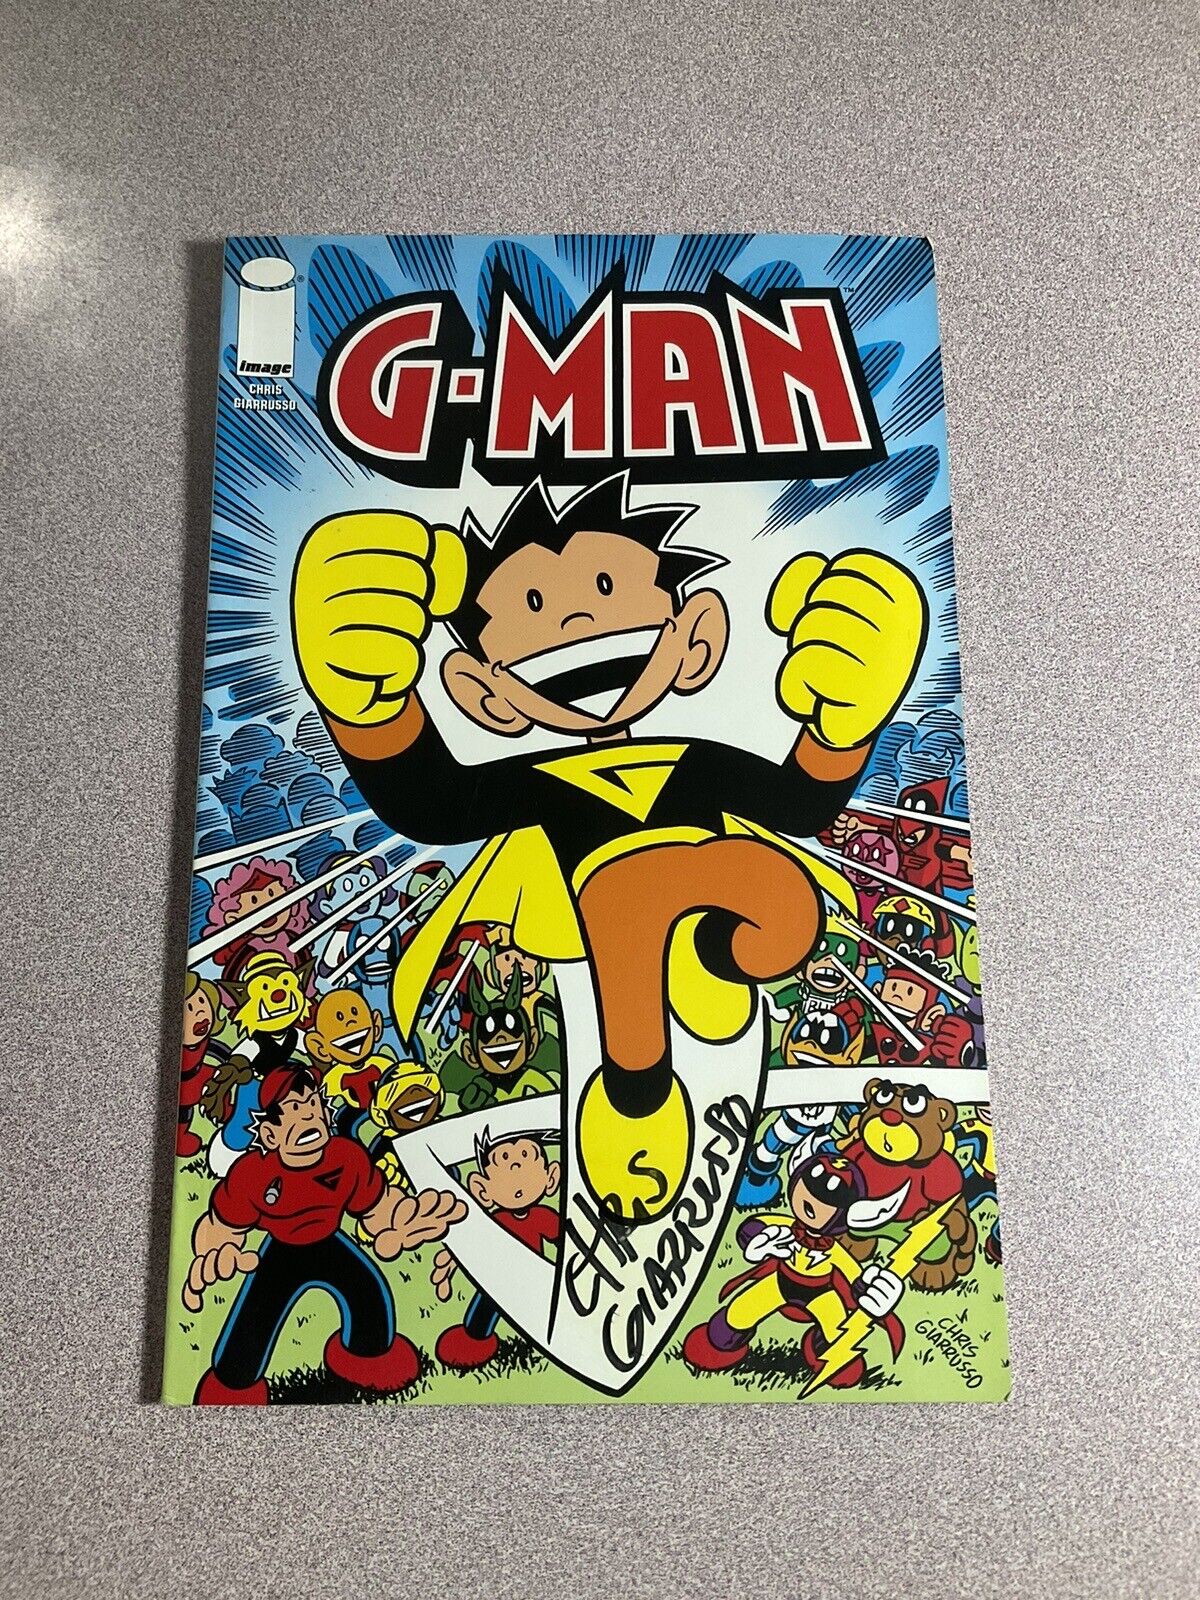 G-MAN #1 -2004 - Image Comics TPB - Signed by Chris Giarrusso